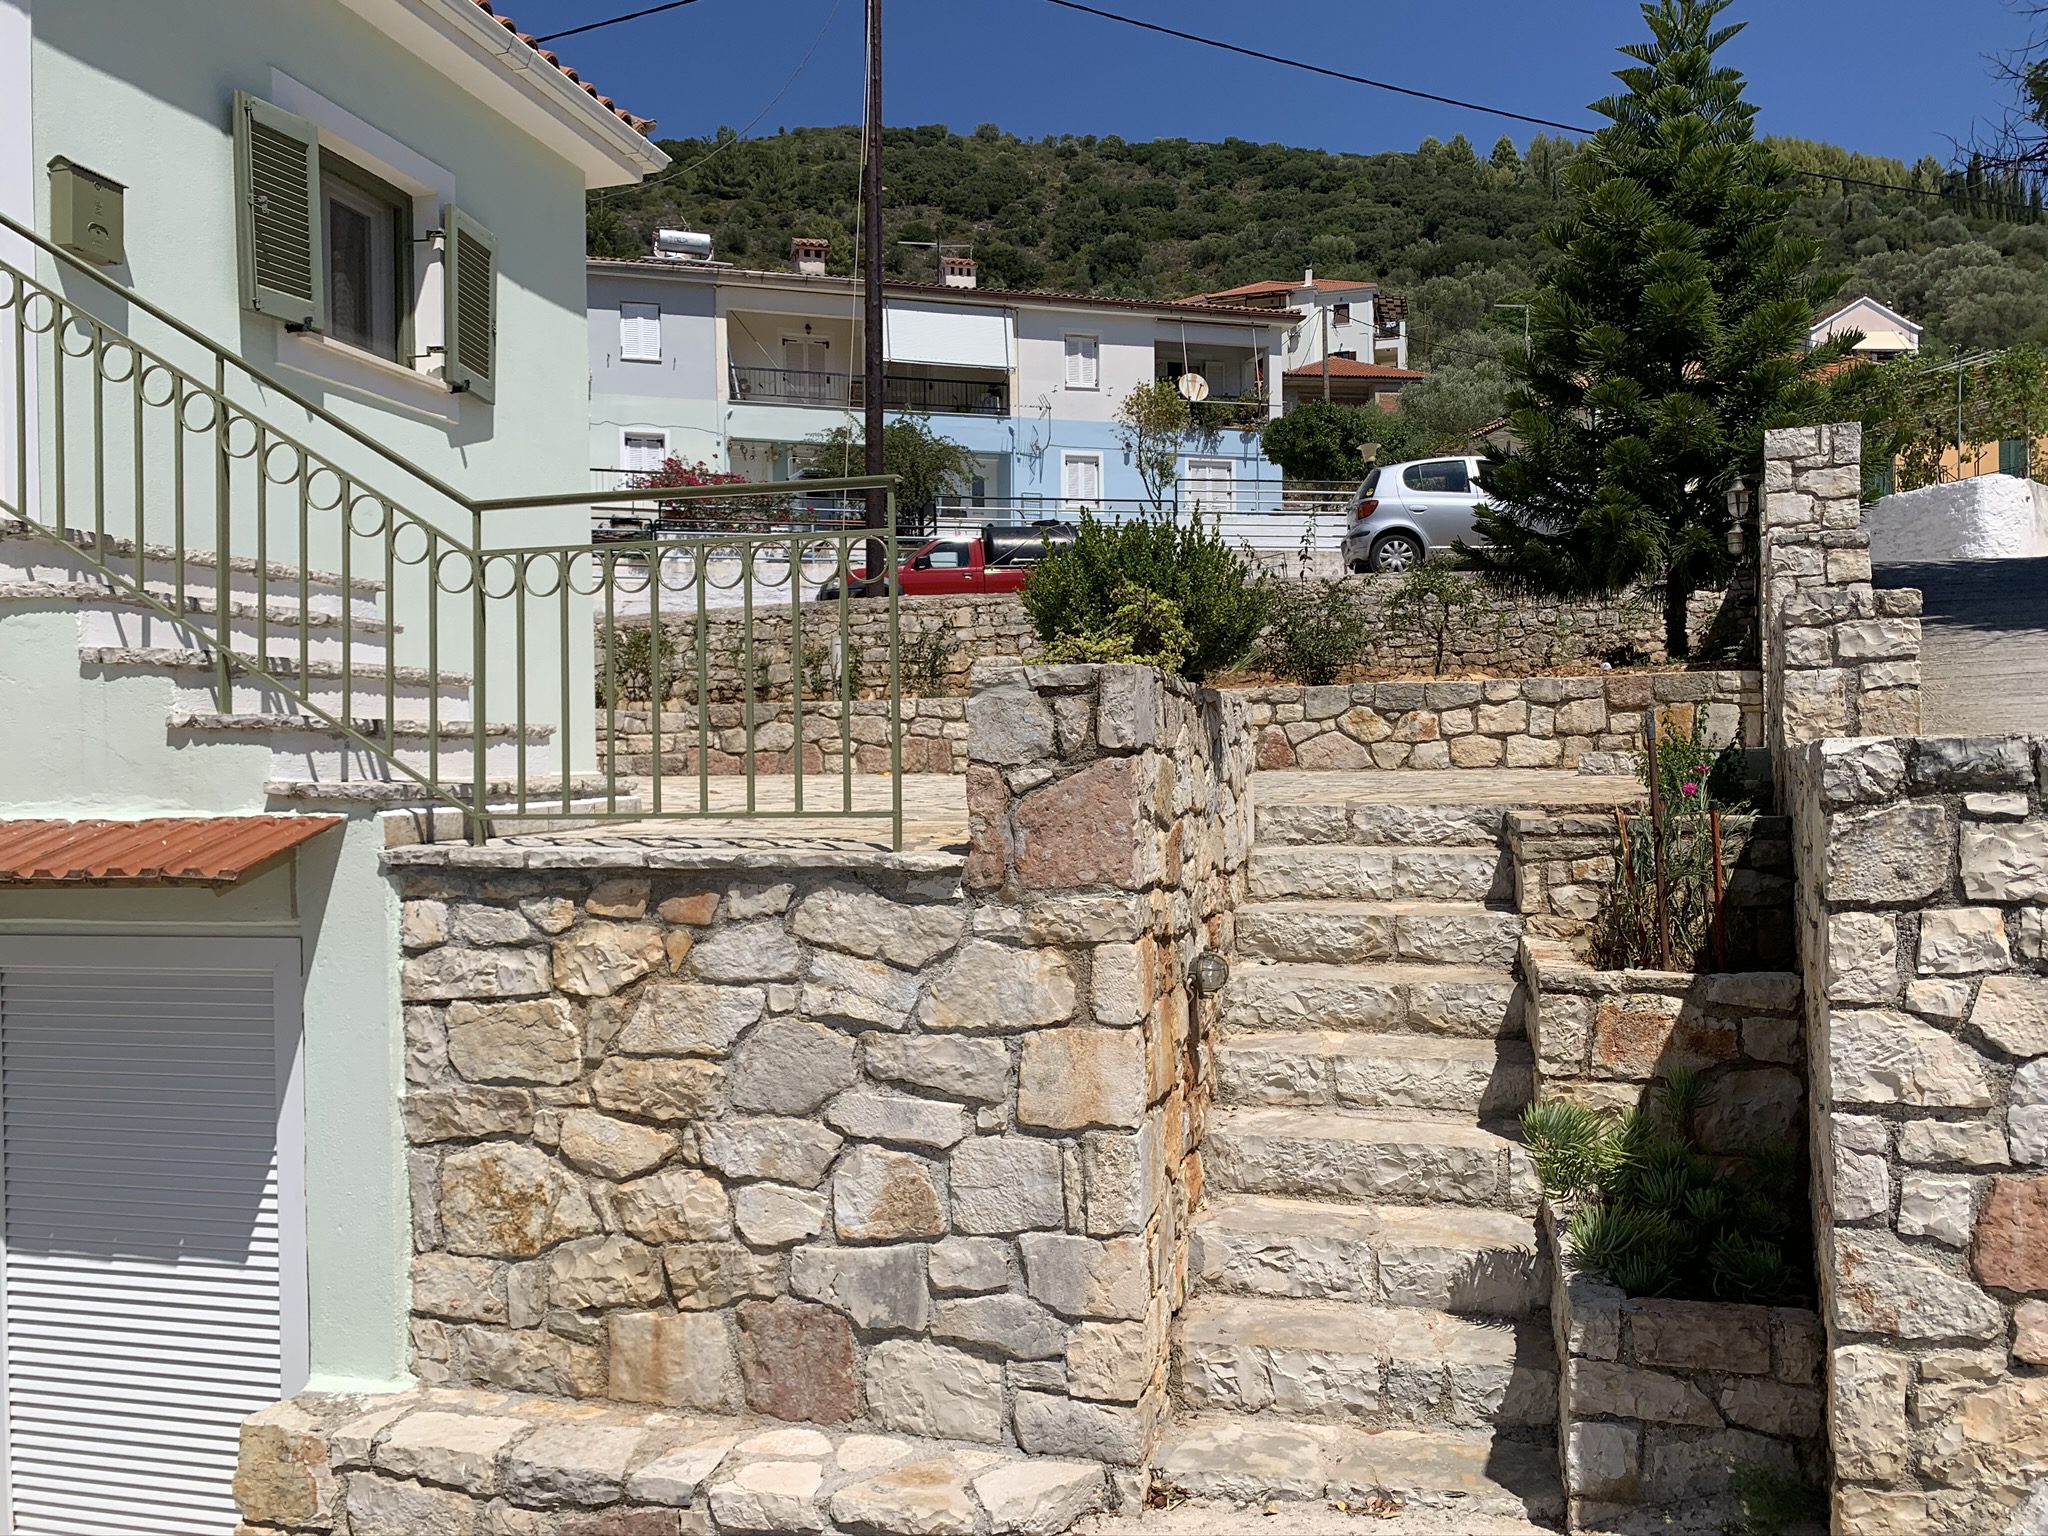 Exterior facade with stone terrace of house for sale in Ithaca Greece, Vathi